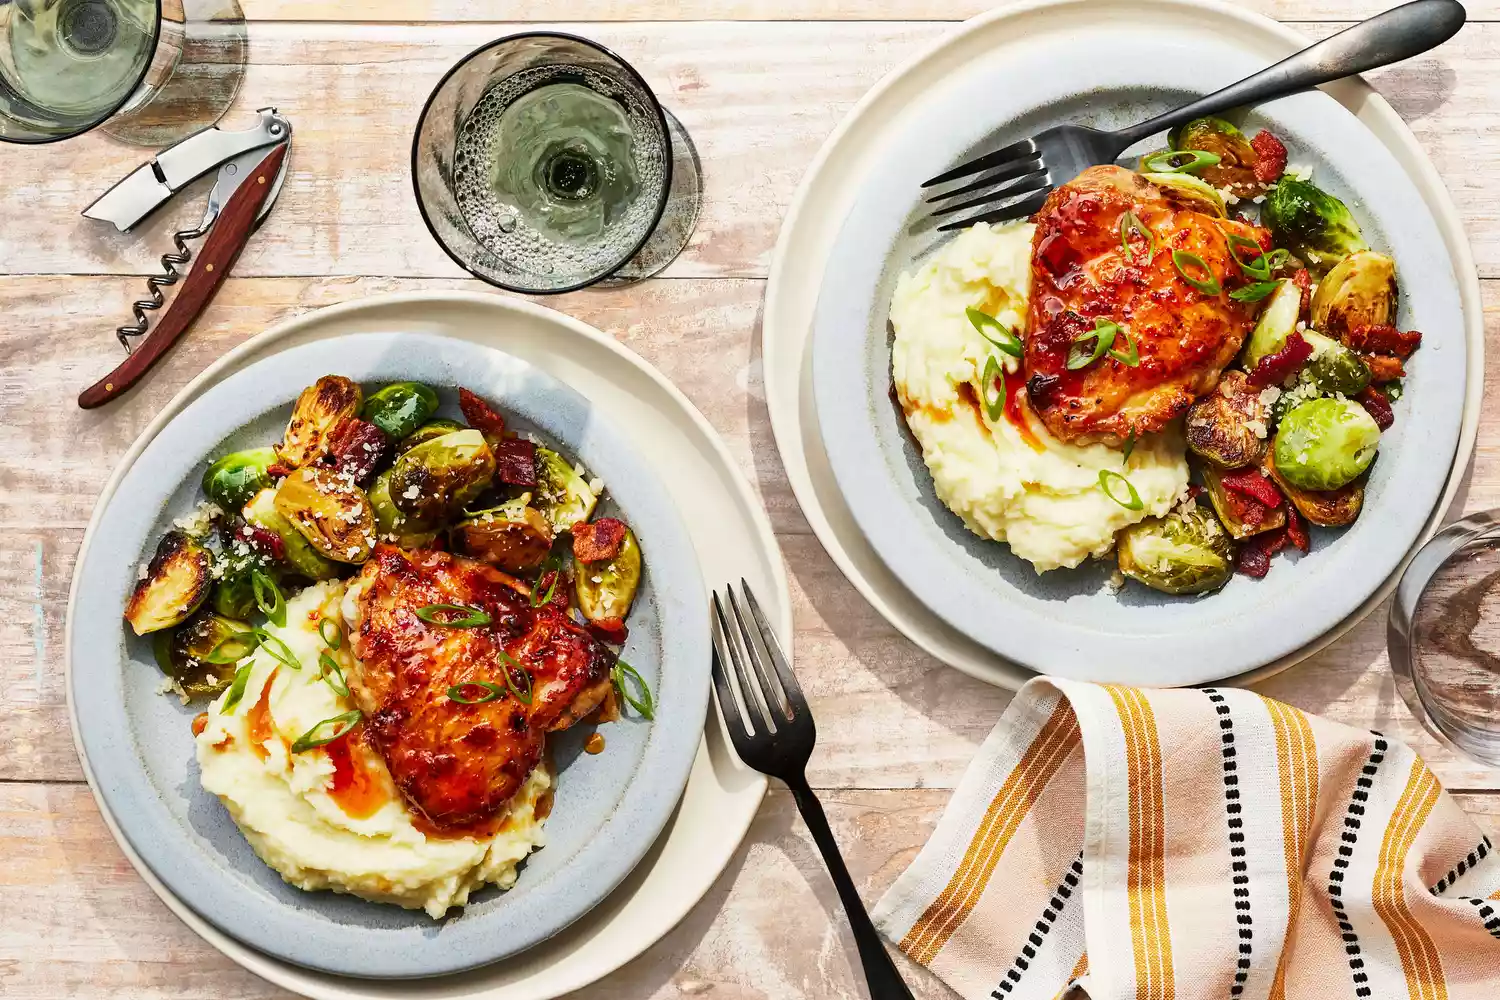 honey garlic chicken and mashed potatoes with brussels sprouts